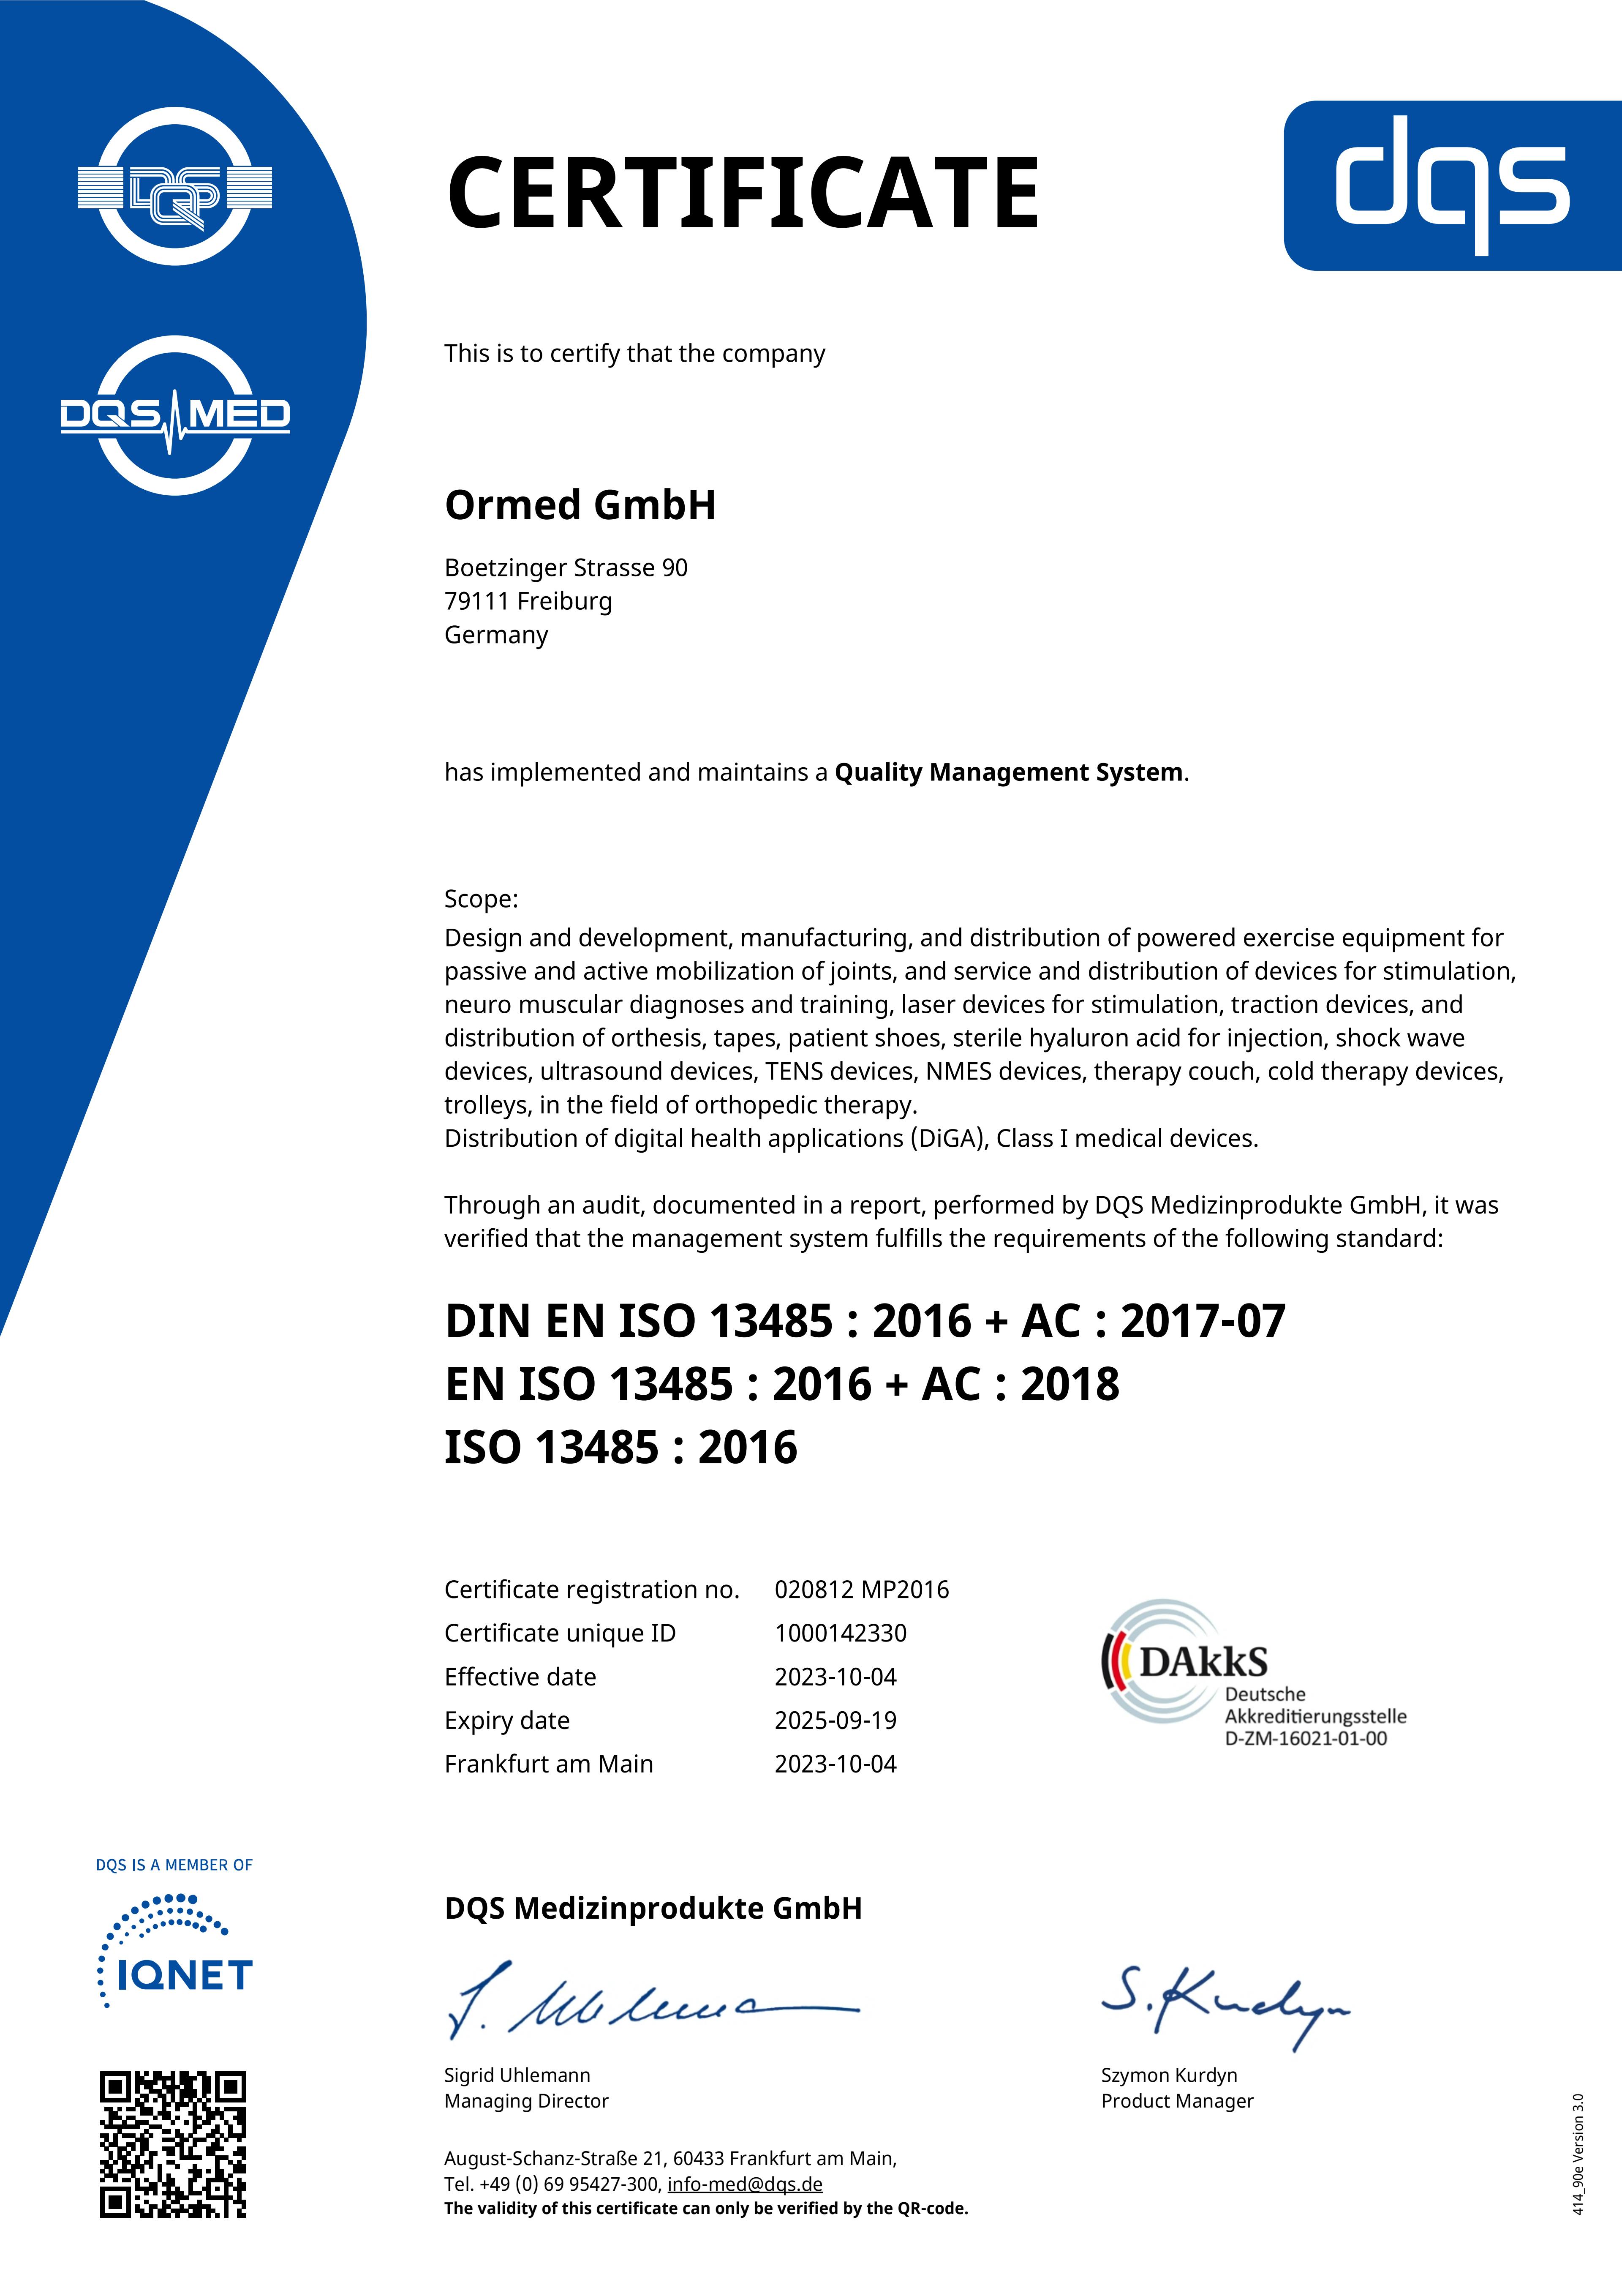 020812 - Ormed GmbH - CERTIFICATE - englisch - 2023-10-04 - MP2016.pdf